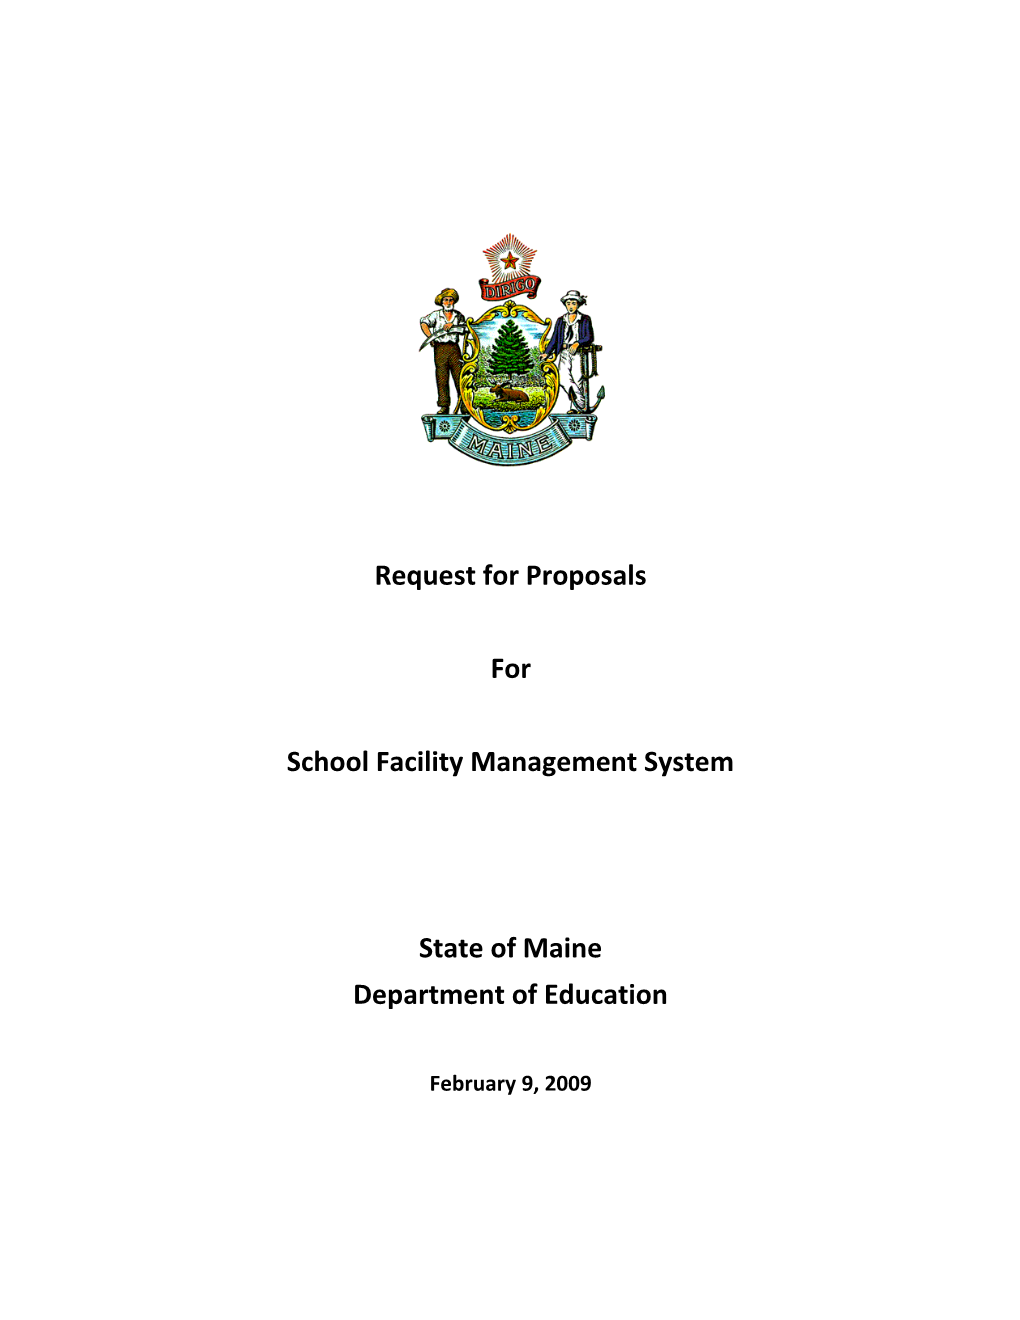 School Facility Management System Request for Proposals